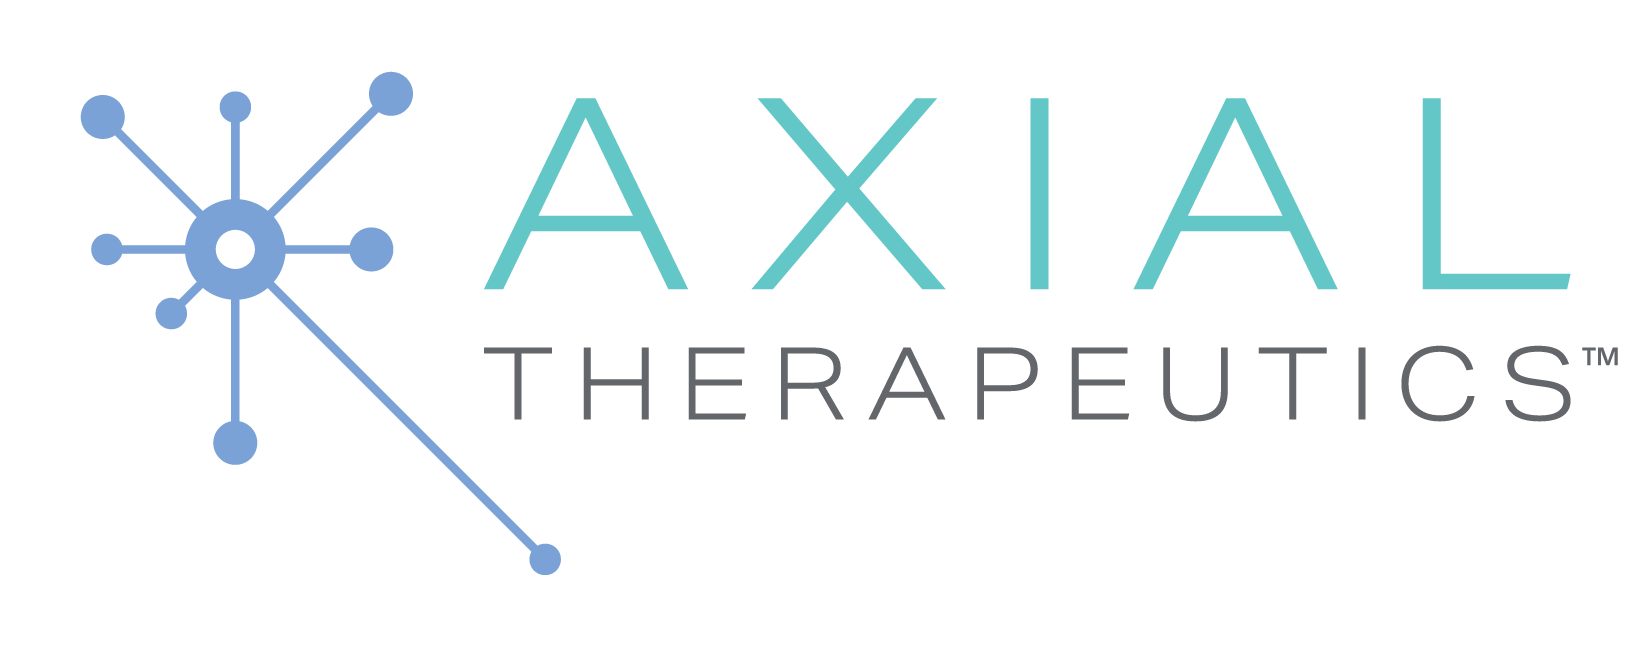 Axial Therapeutics Expands Clinical Development Capabilities with Key Appointments